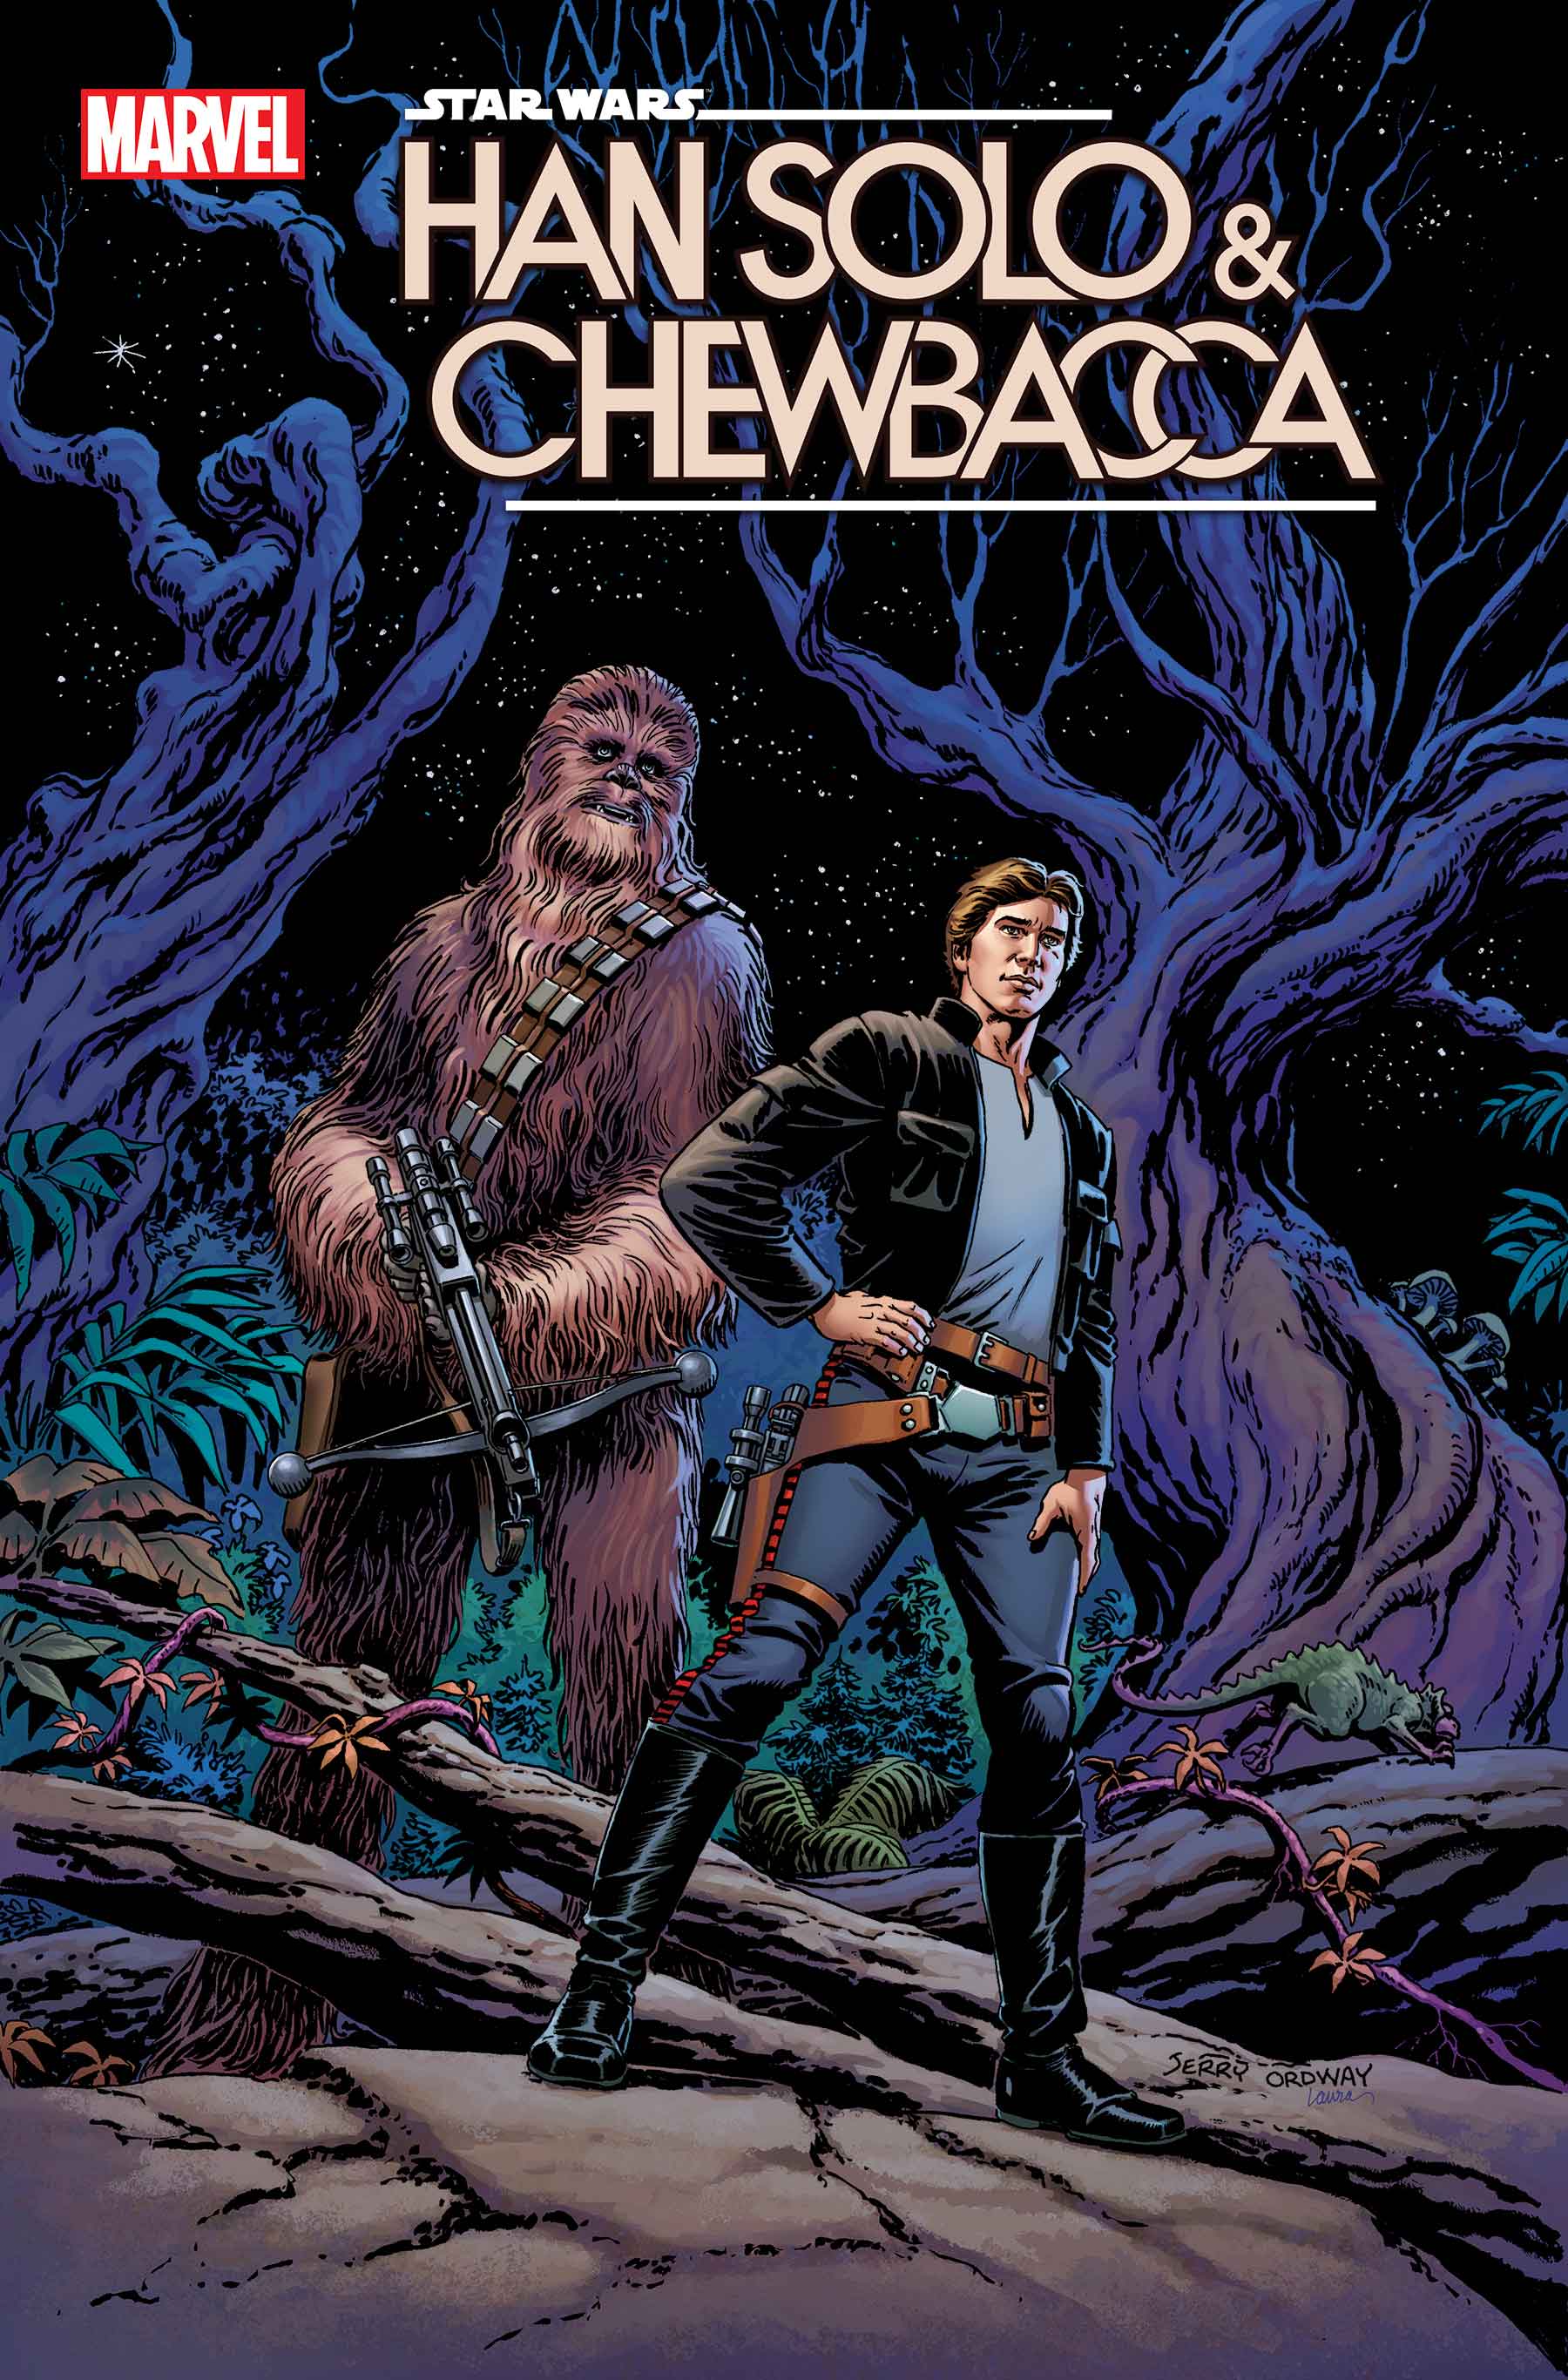 Star Wars: Han Solo & Chewbacca (2022) #8 (Variant)